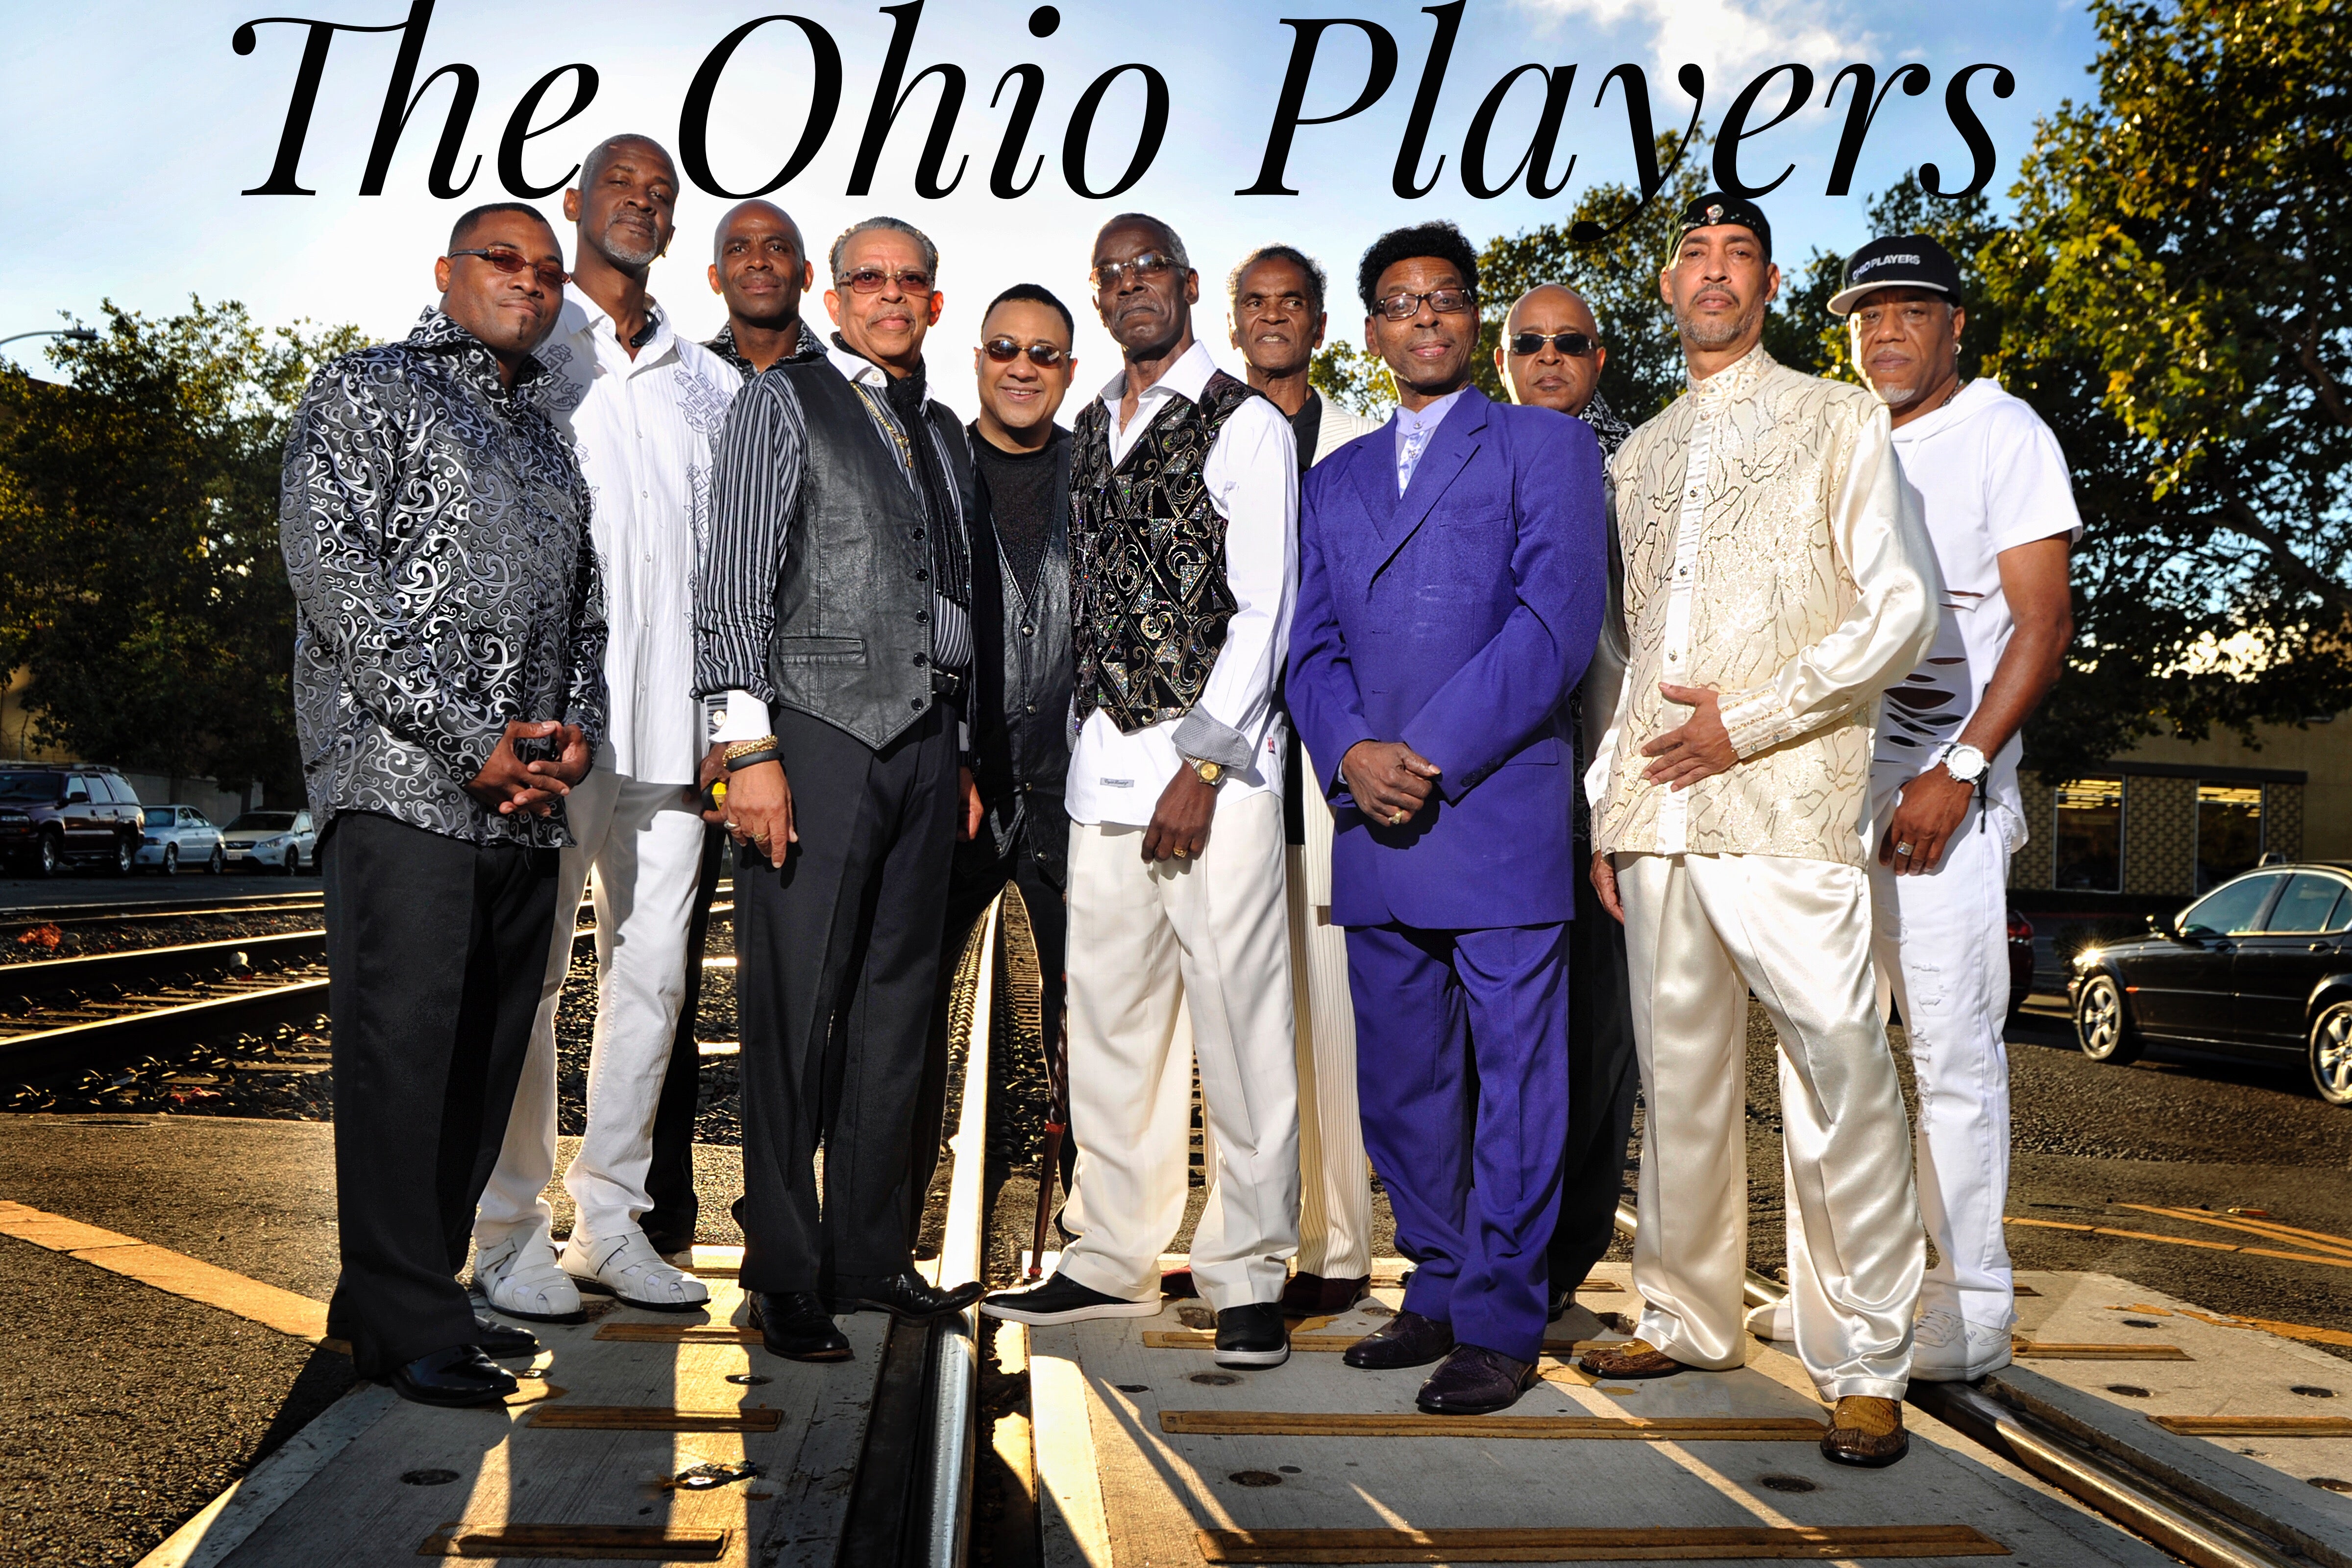 exclusive presale password for The Ohio Players and Midnight Star affordable tickets in Columbus